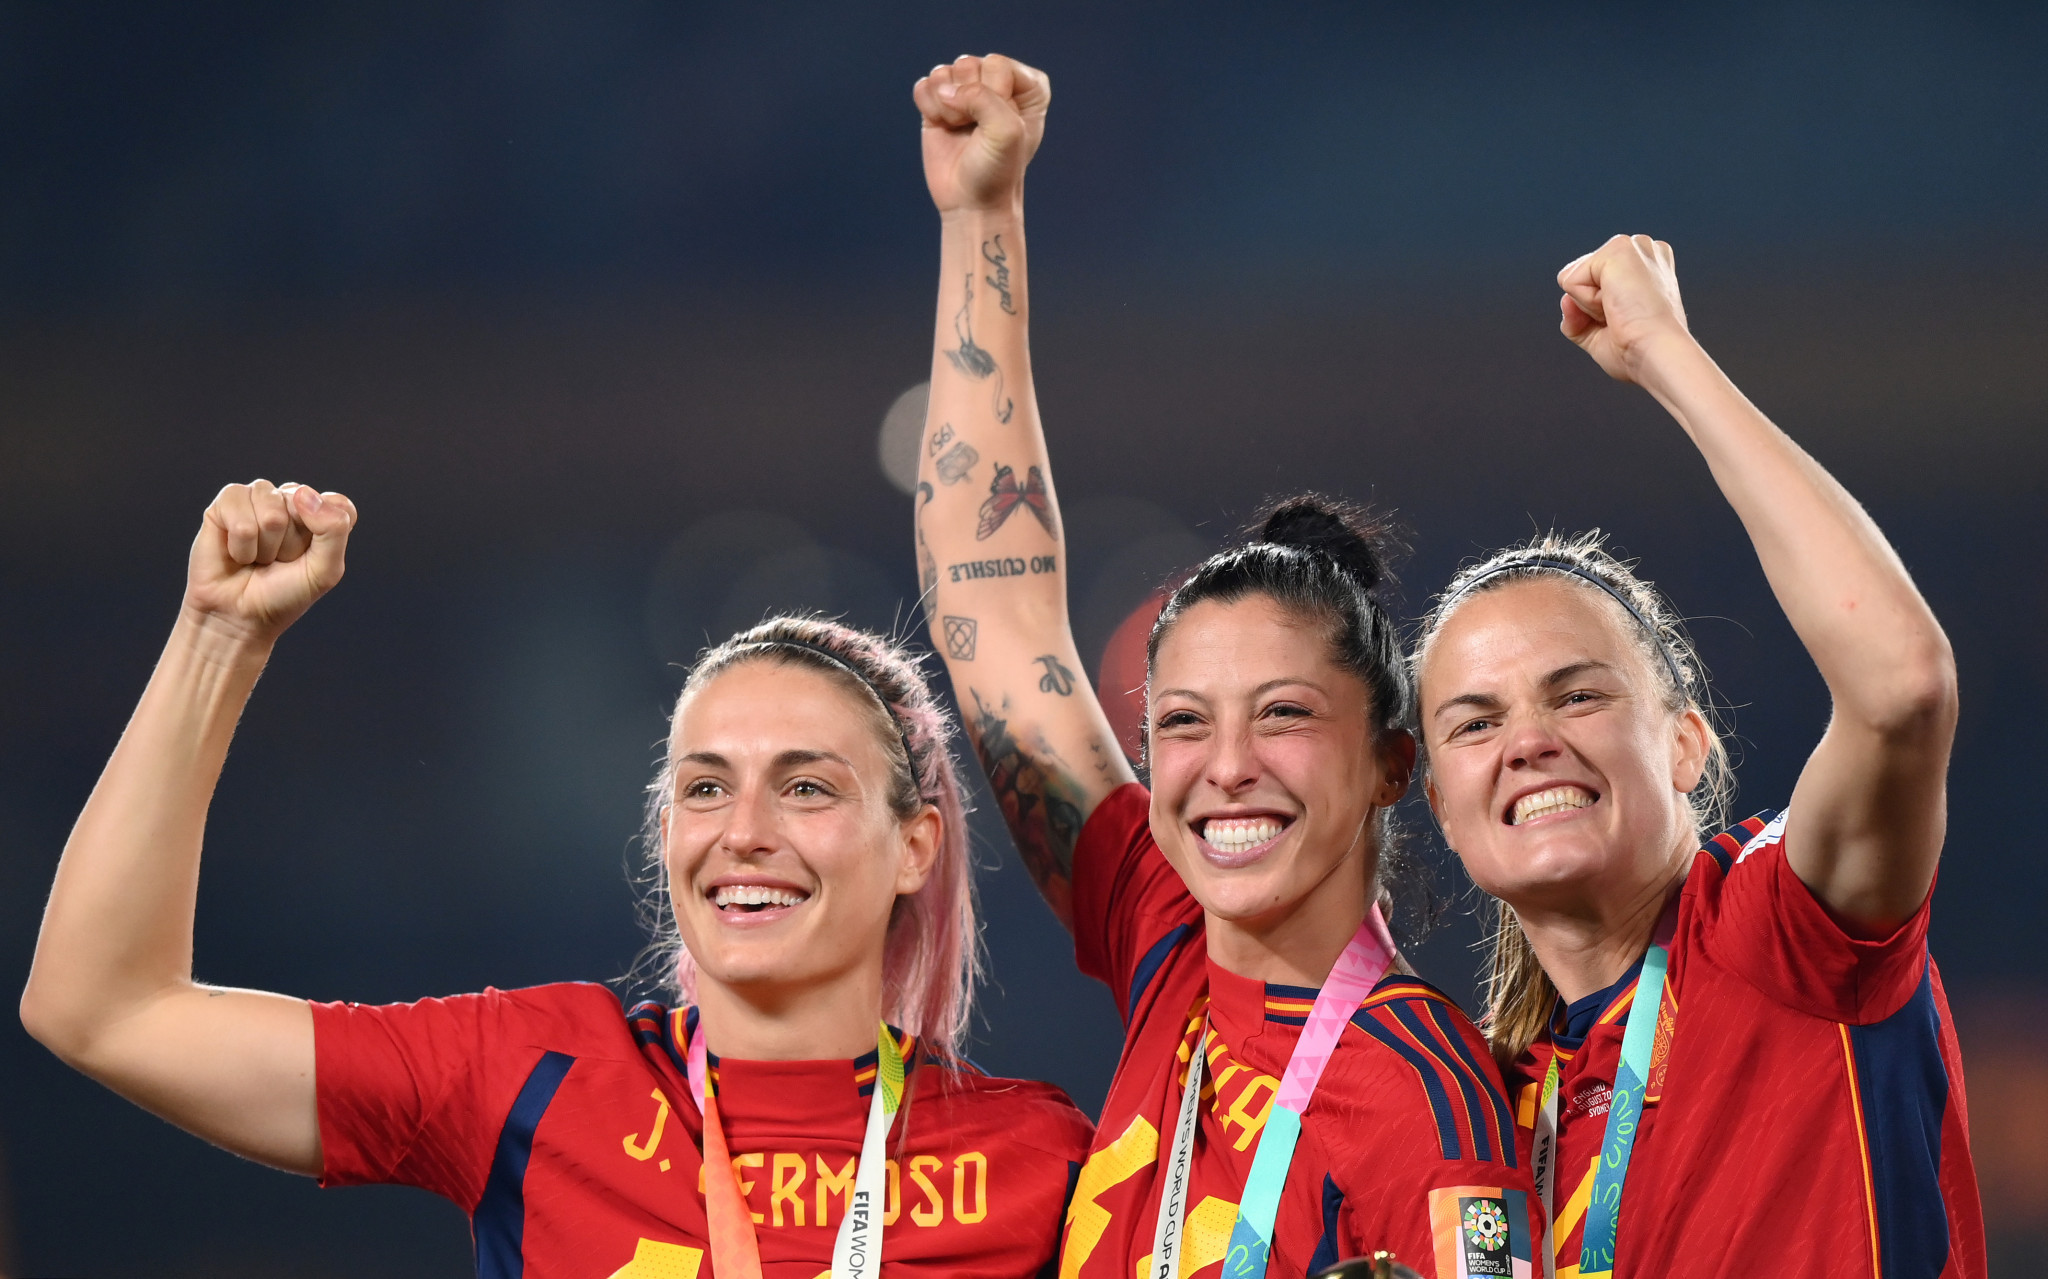 The Spanish women's team said that they will continue to boycott the national team until further changes are made at RFEF ©Getty Images